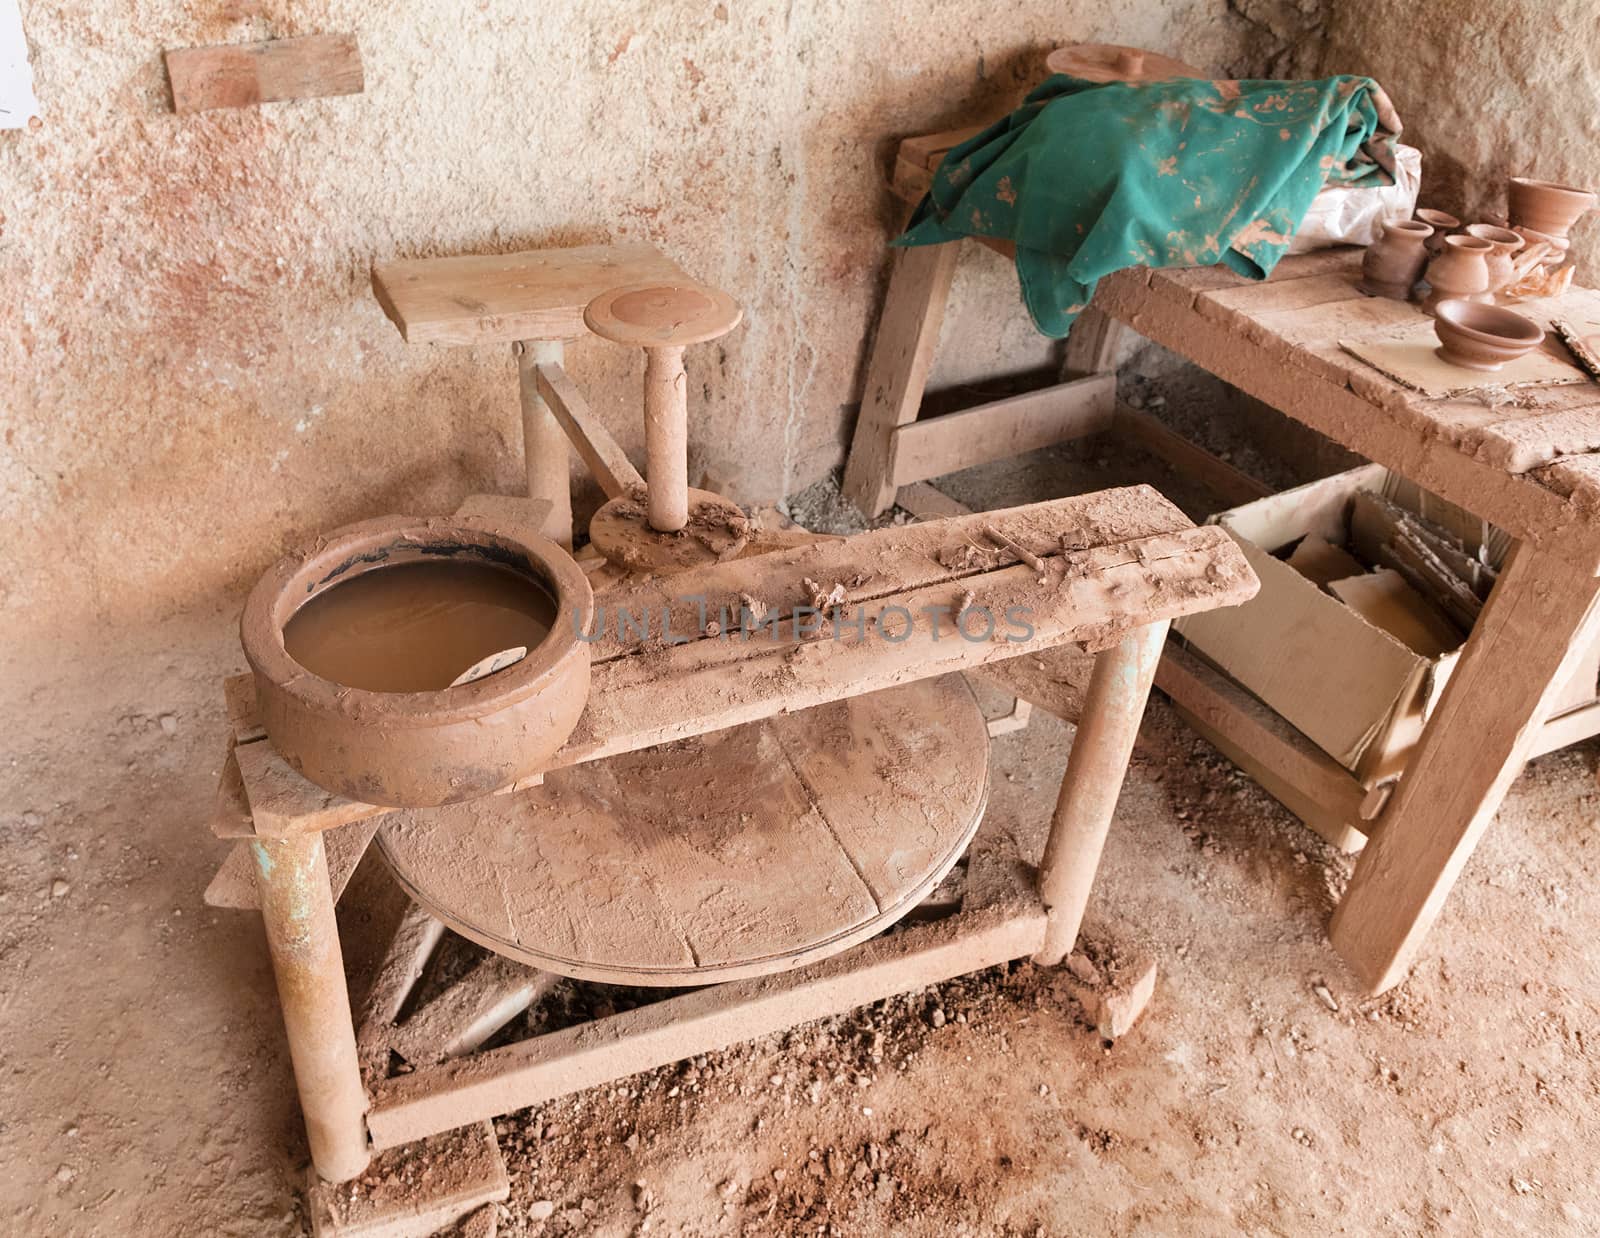 Primitive wooden pottery and red clay are the tools of an ancient artisan